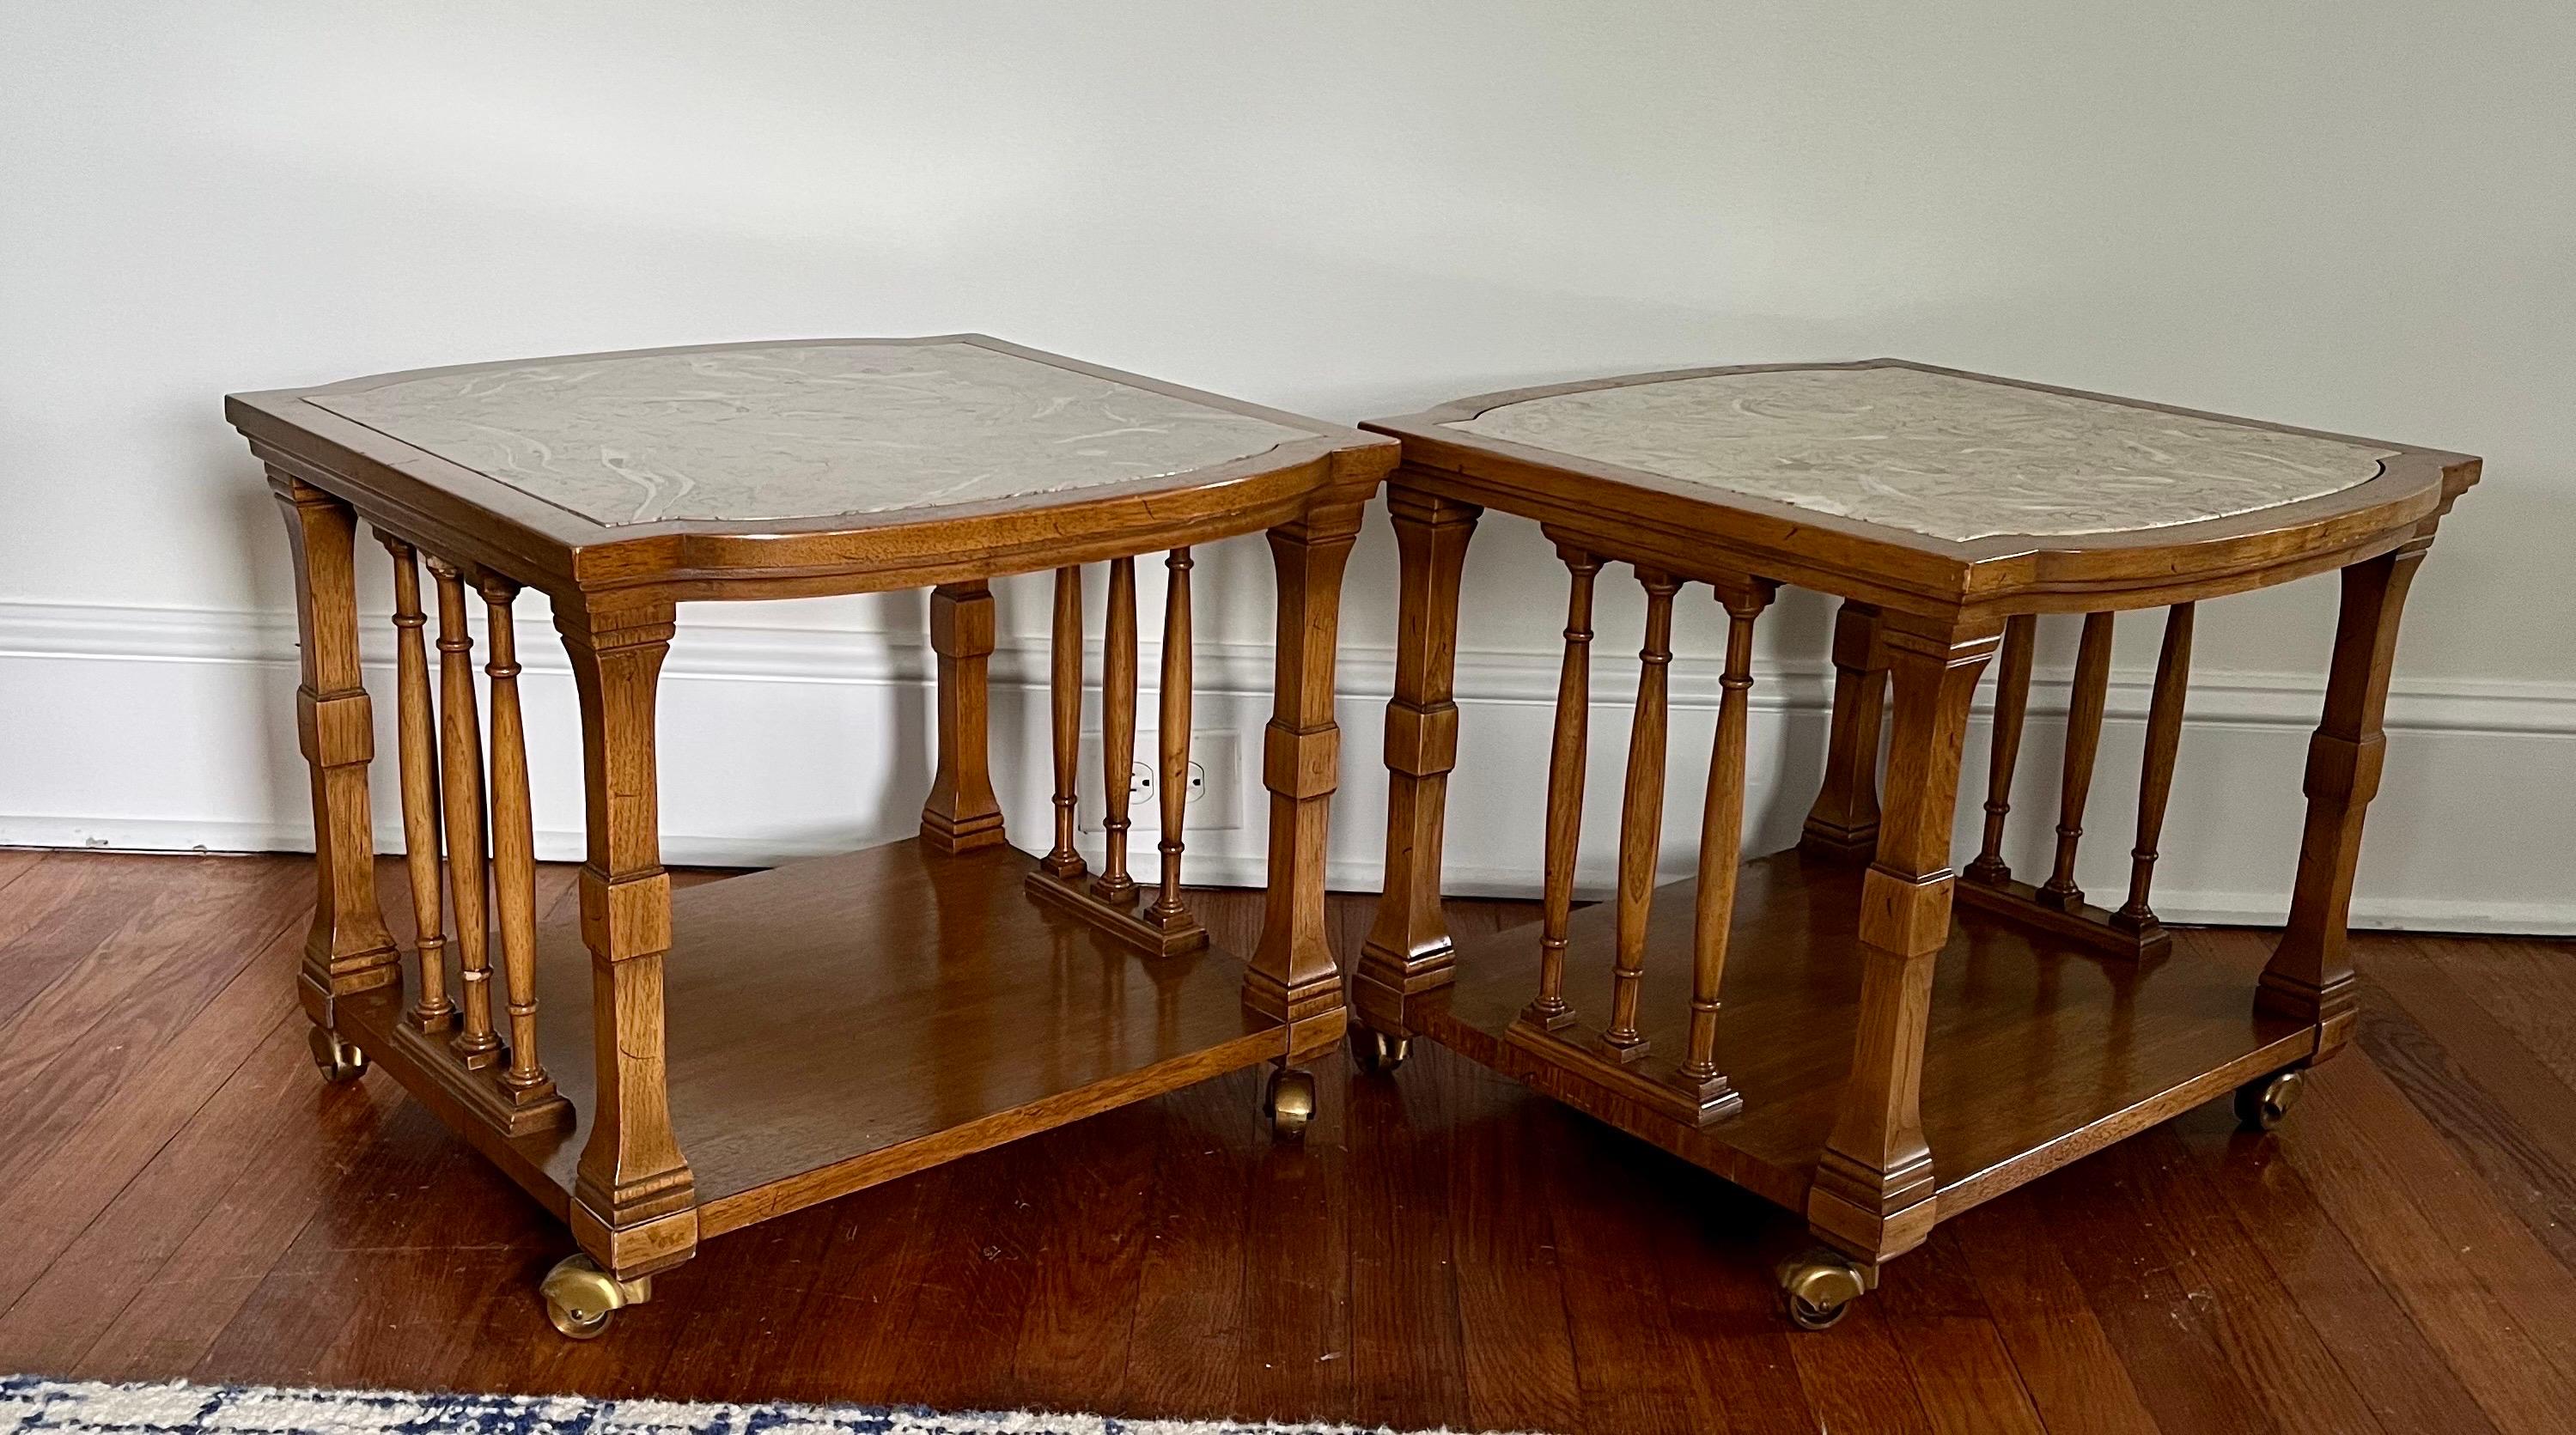 Pavane Furniture by Tomlinson Fossil Marble top tables. Neoclassical meets mid-century with column sides. Great irregular top surface. Brass swivel casters. 
Curbside to NYC/Philly $350.